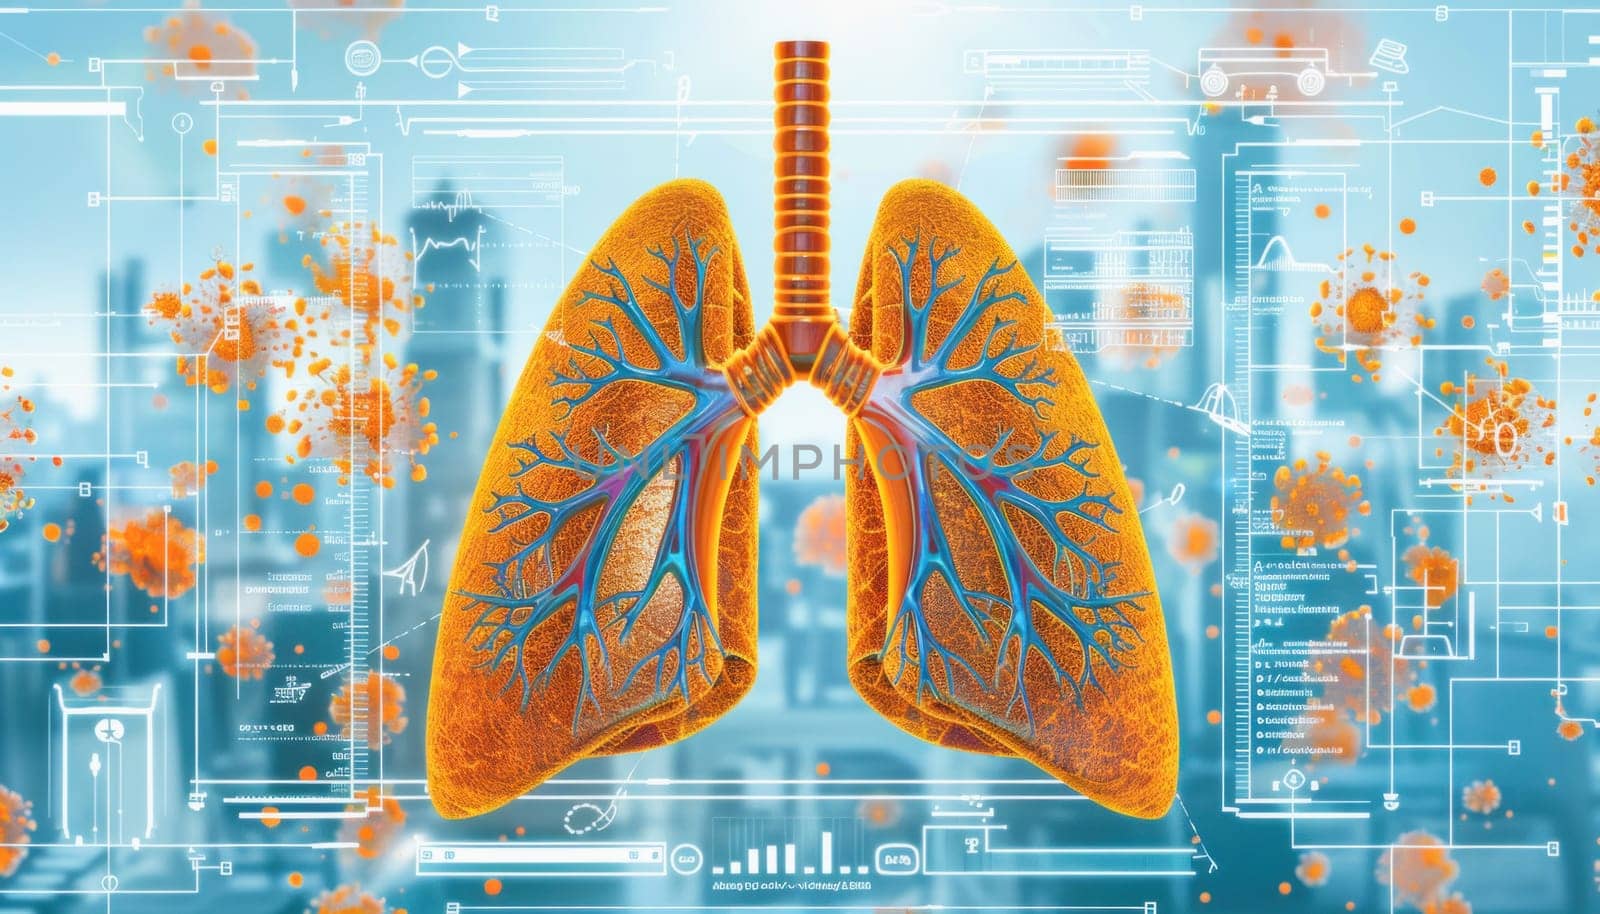 Computergenerated image of a lung in front of a city backdrop showcases artistry and urban elements in its composition